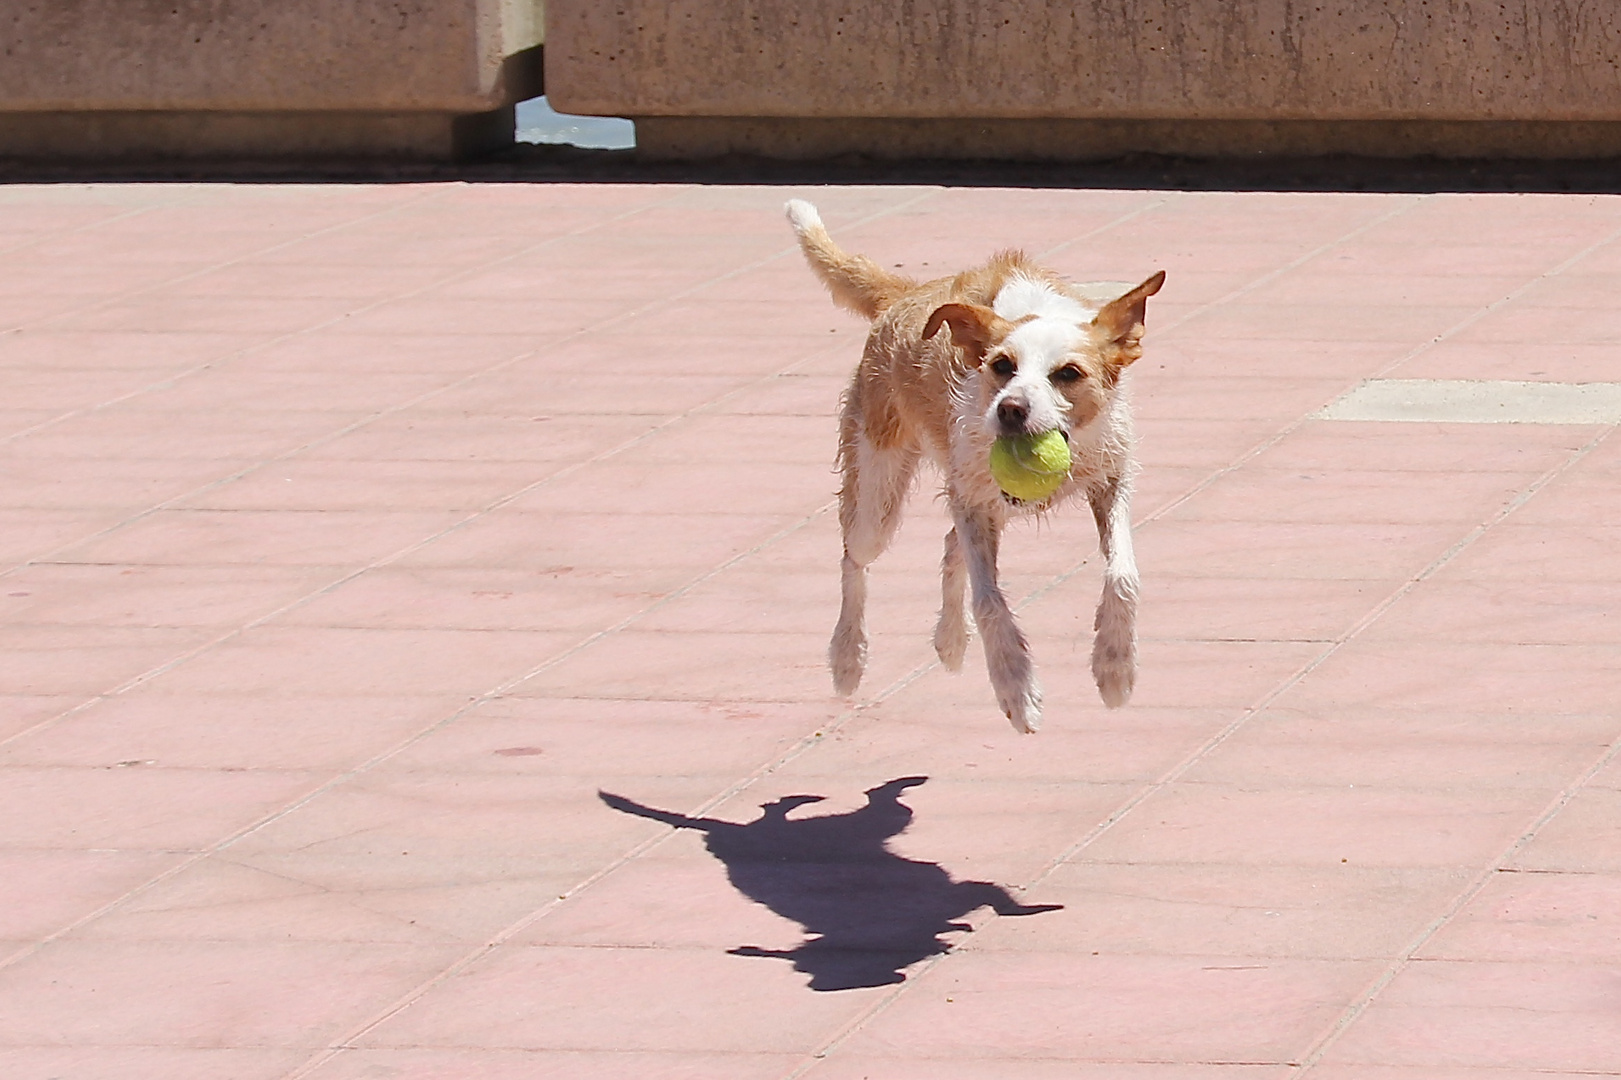 JACK RUSSELL - Jumping Jack